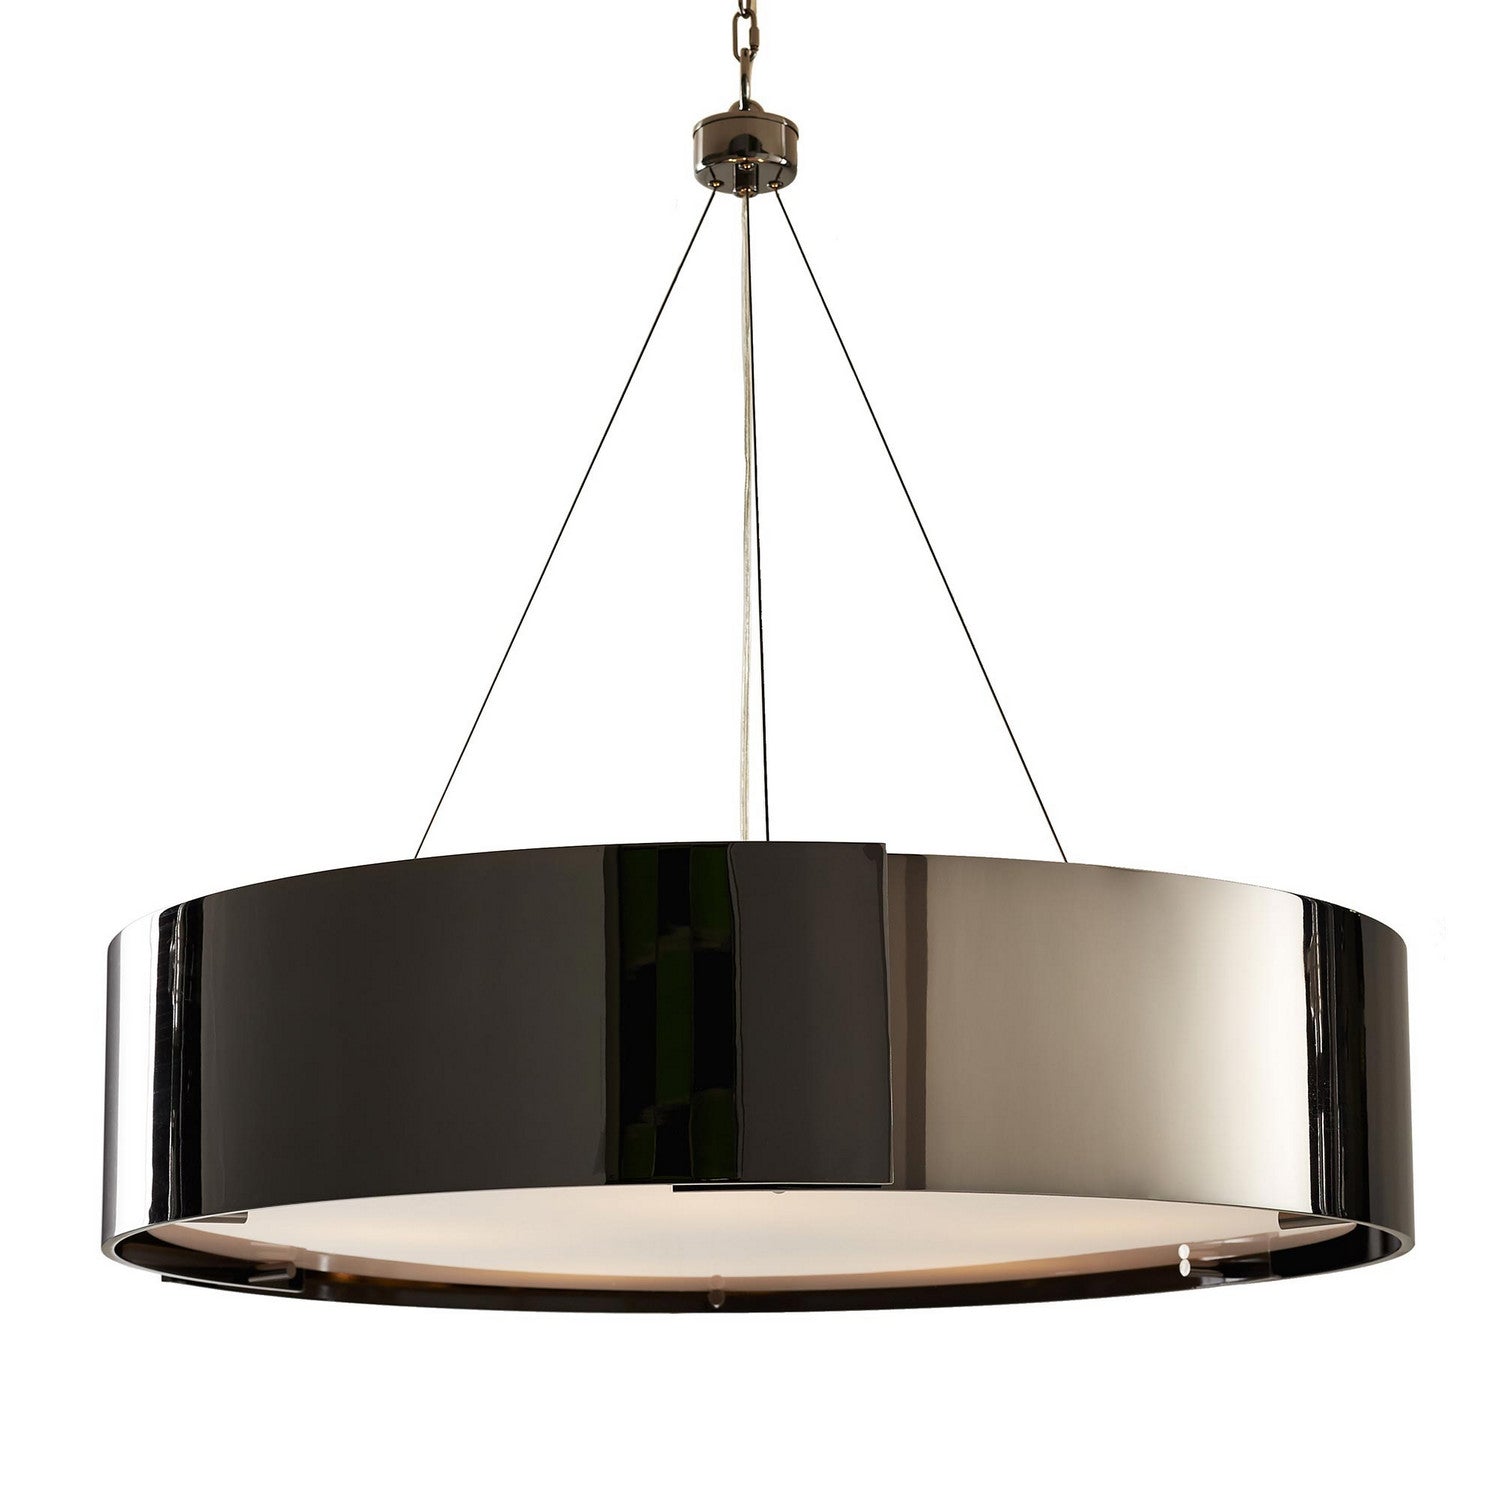 Five Light Chandelier from the Dante collection in Black Nickel finish